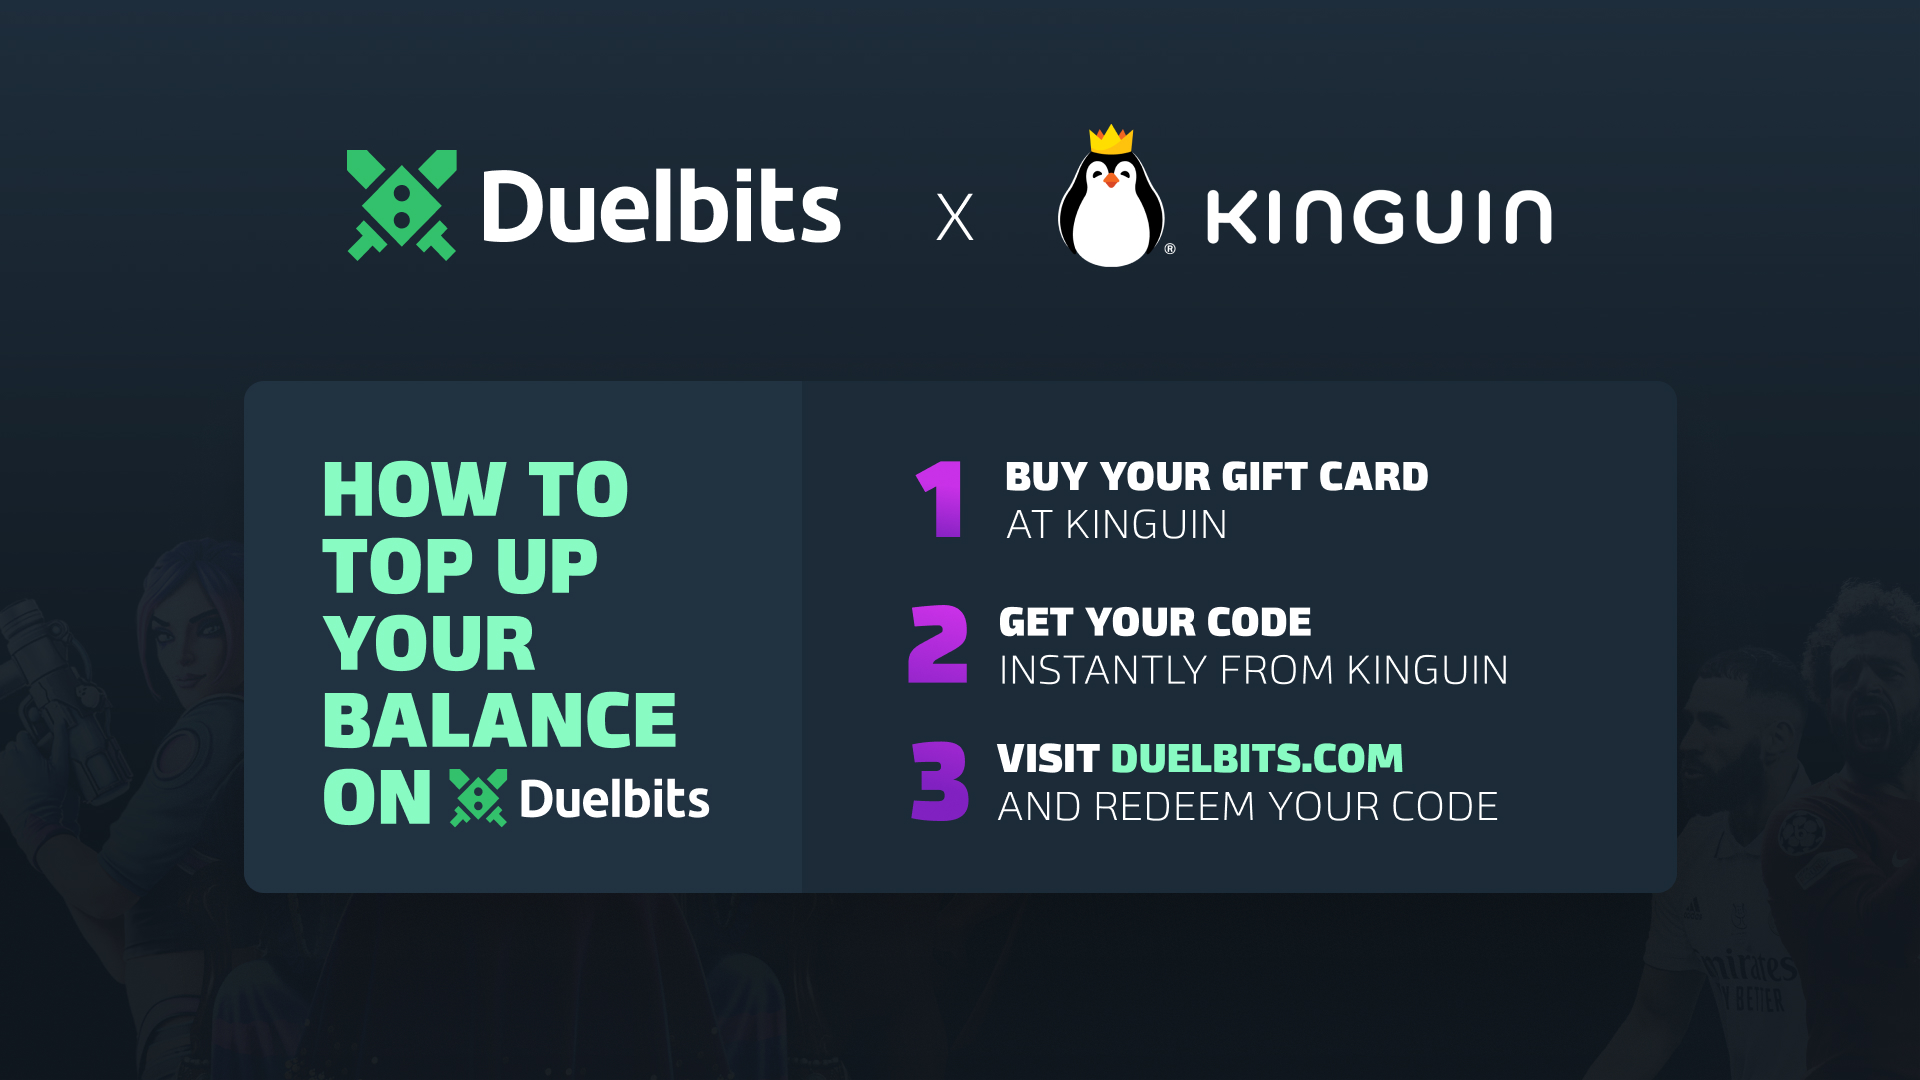 DuelBits $5 Gift Card $6.27